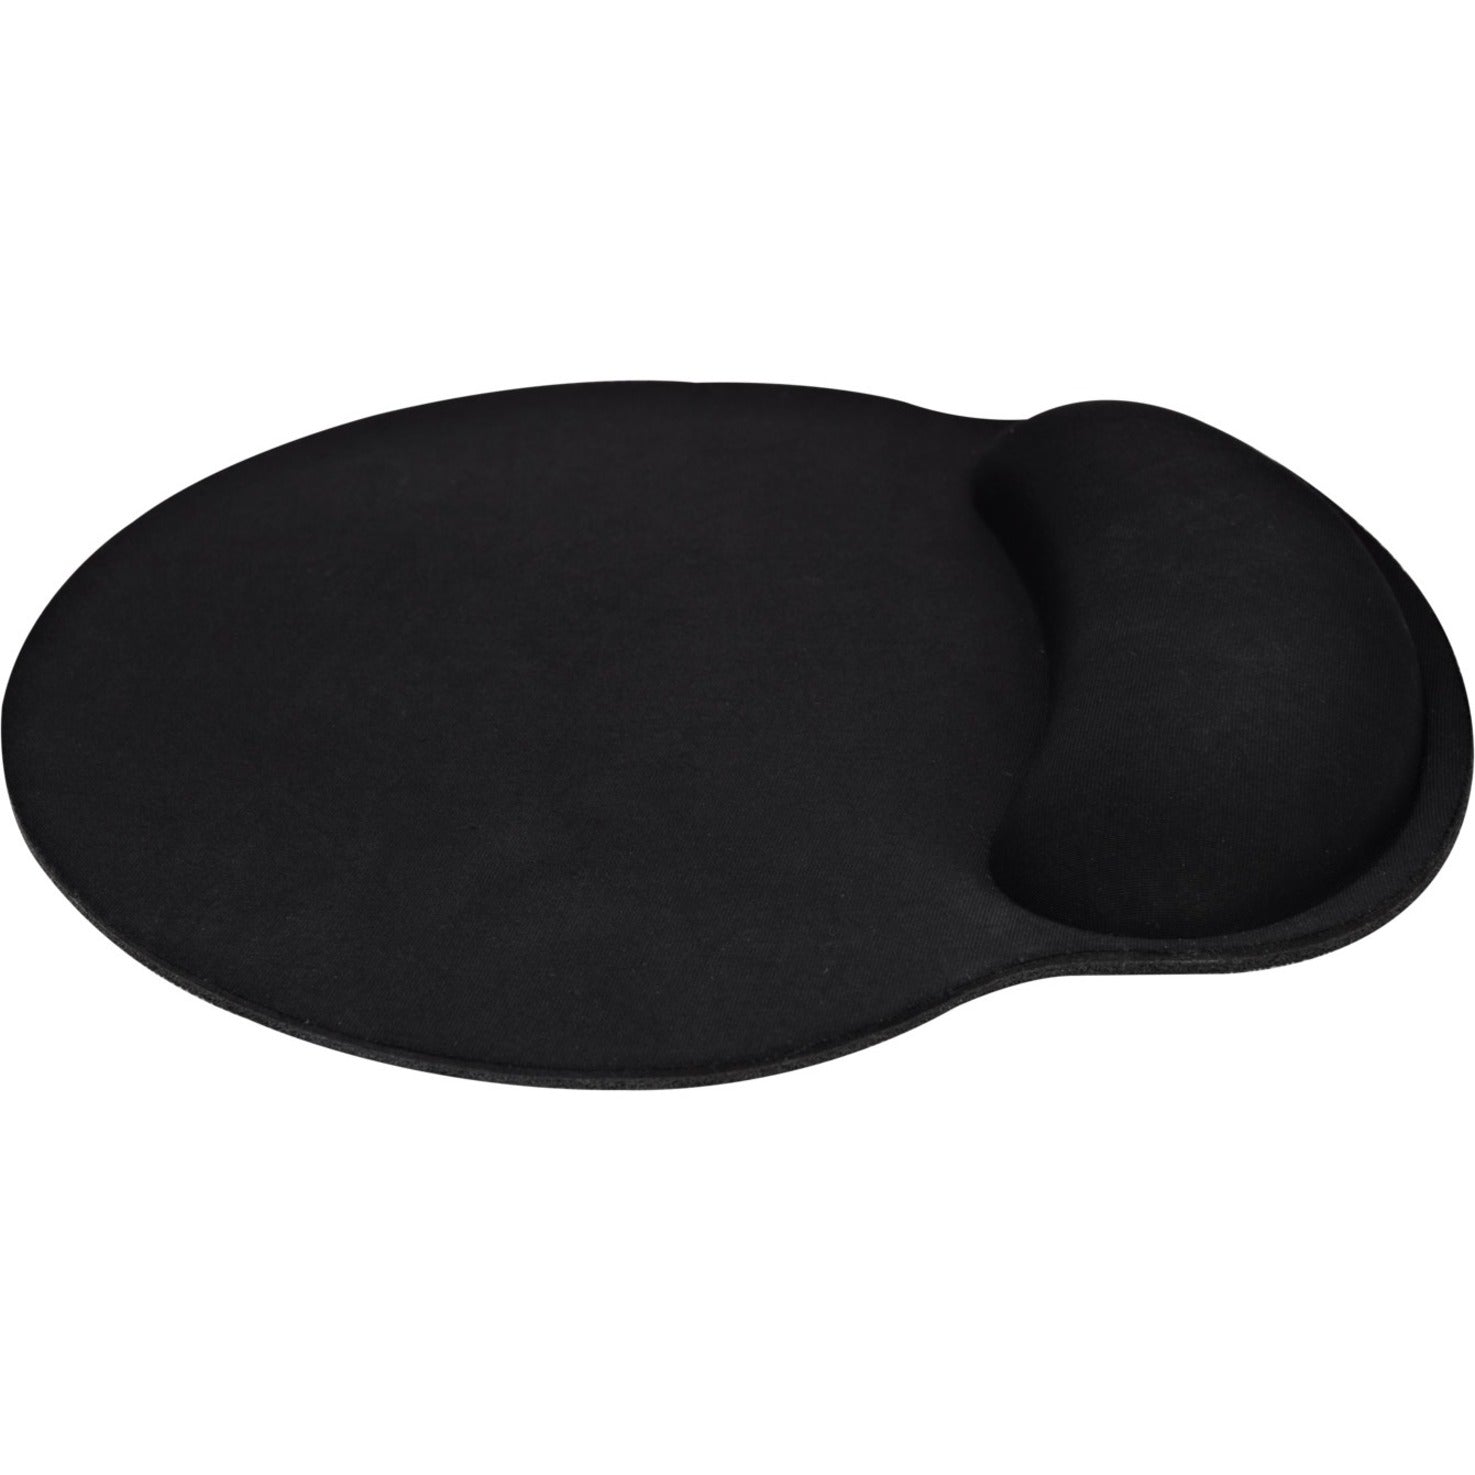 V7 MP03BLK Memory Foam Support Mouse Pad, Ergo Wrist Support, Non Skid Bottom